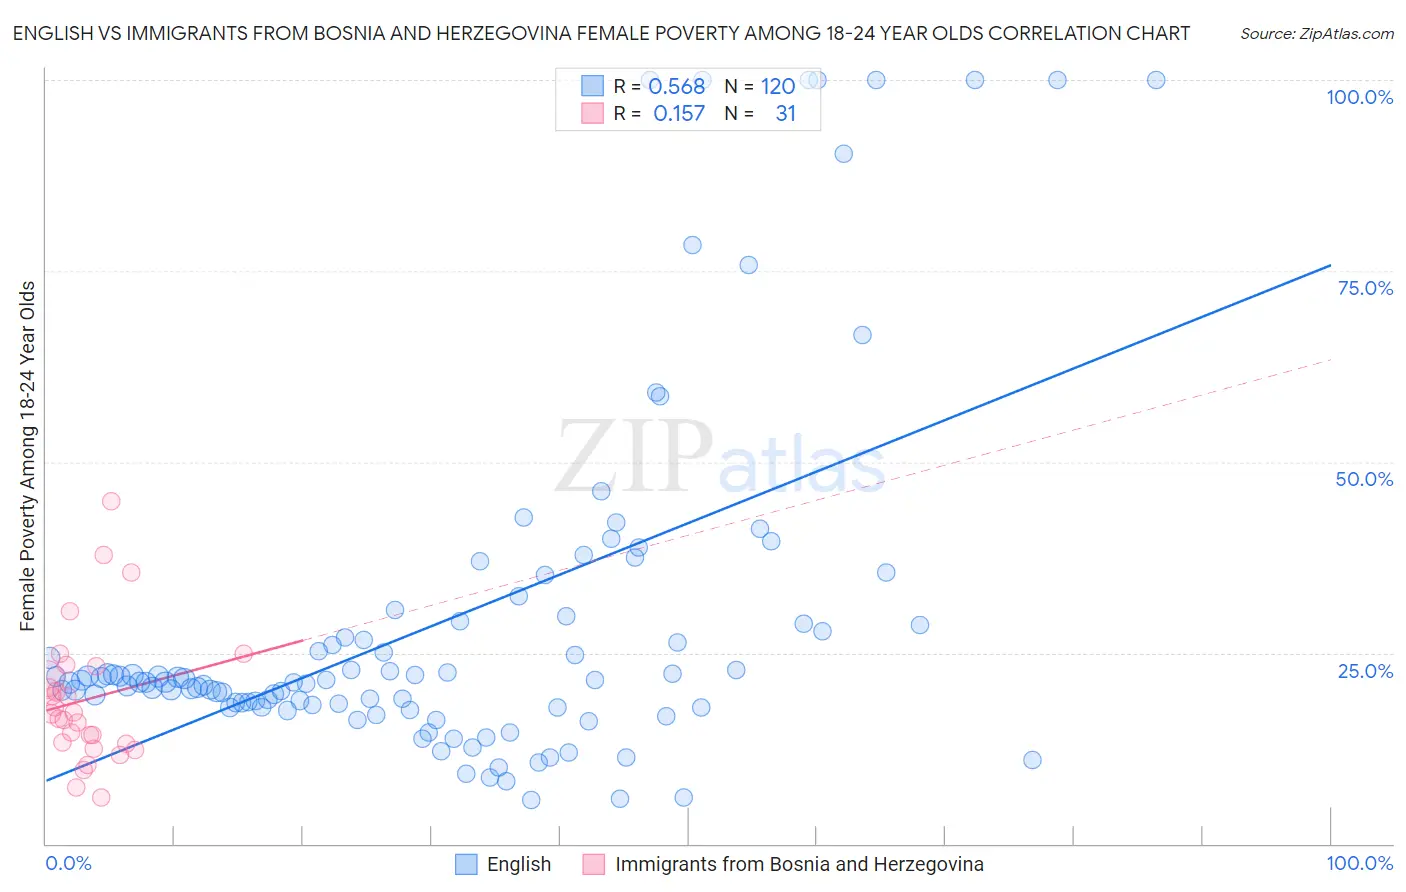 English vs Immigrants from Bosnia and Herzegovina Female Poverty Among 18-24 Year Olds